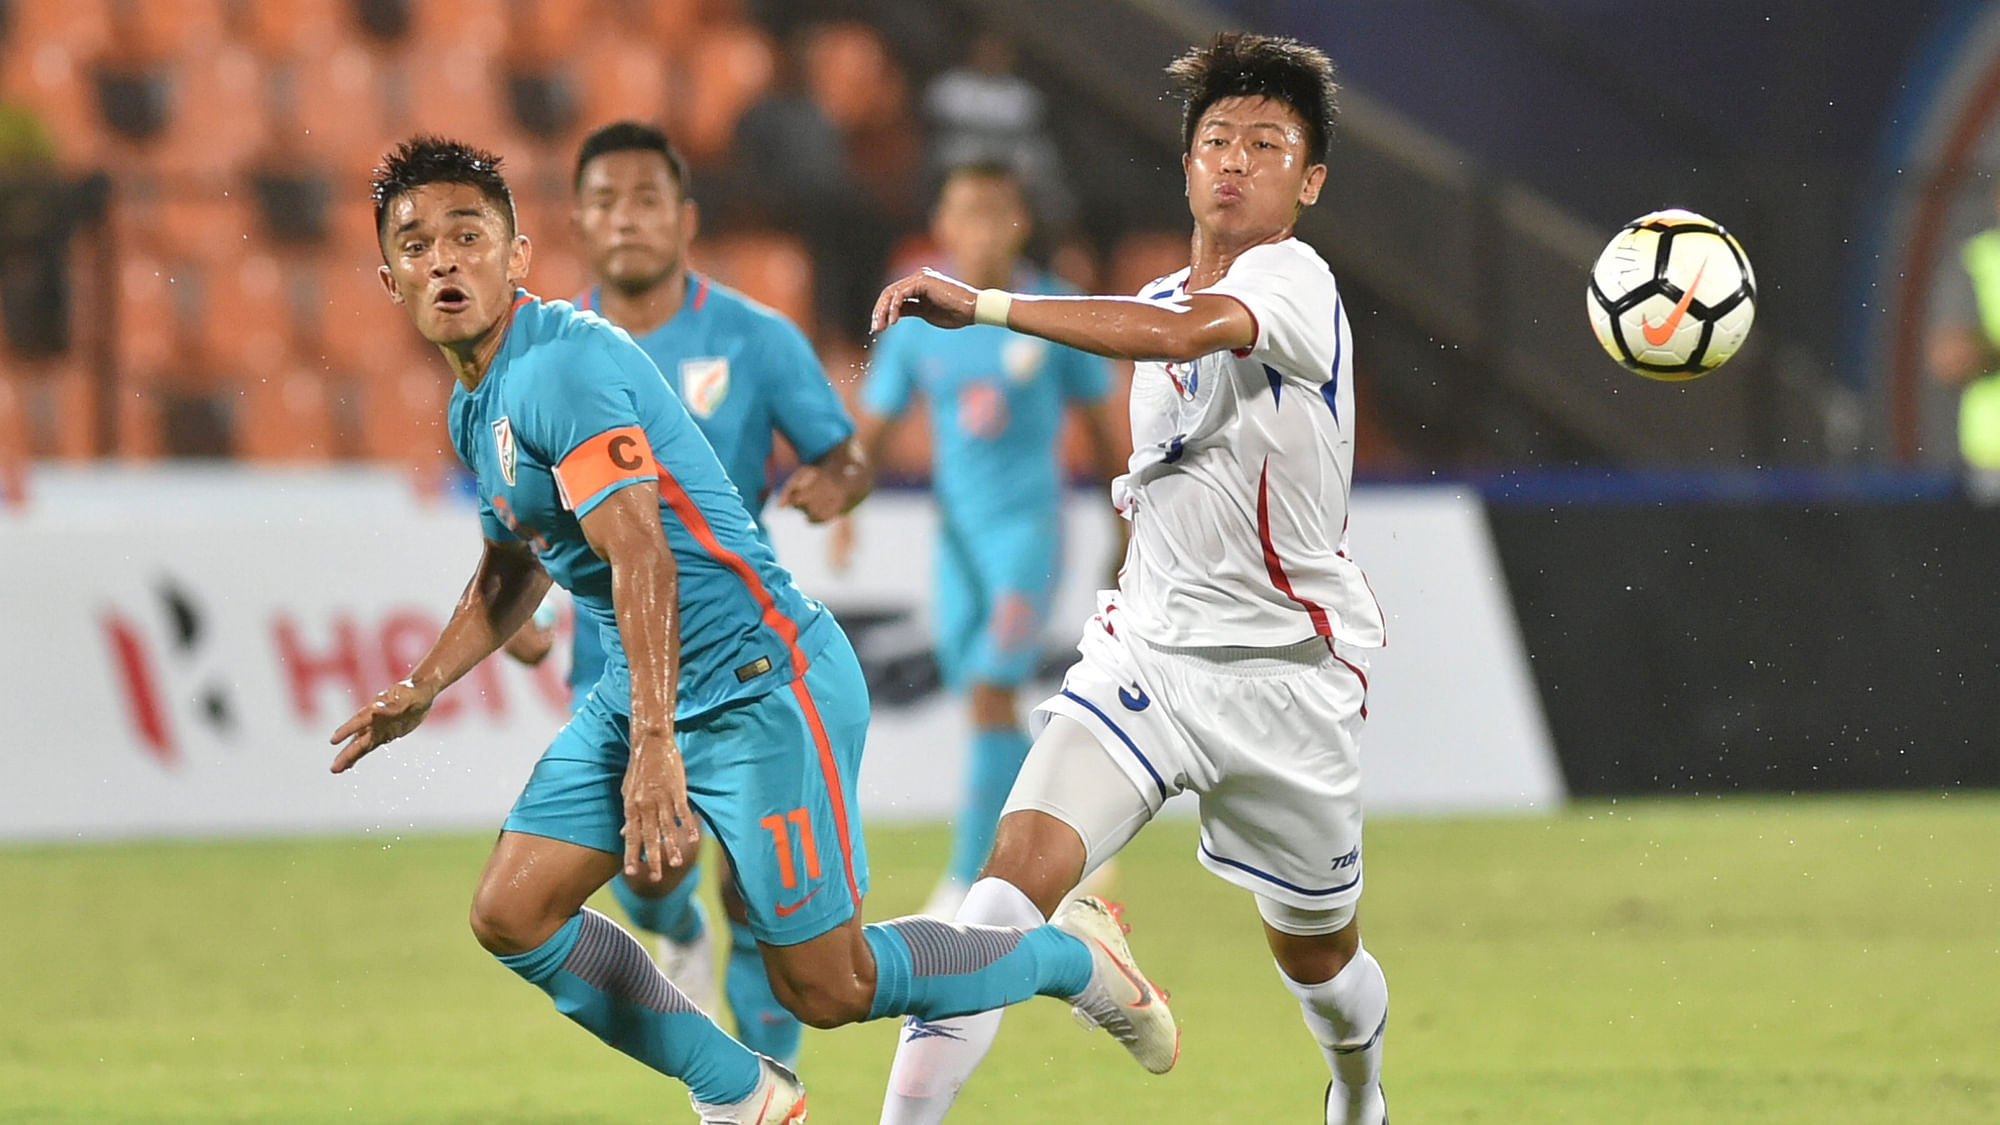 Captain Sunil Chhetri led from the front with a hat-trick as hosts India flexed their muscles and outplayed Chinese Taipei 5-0.